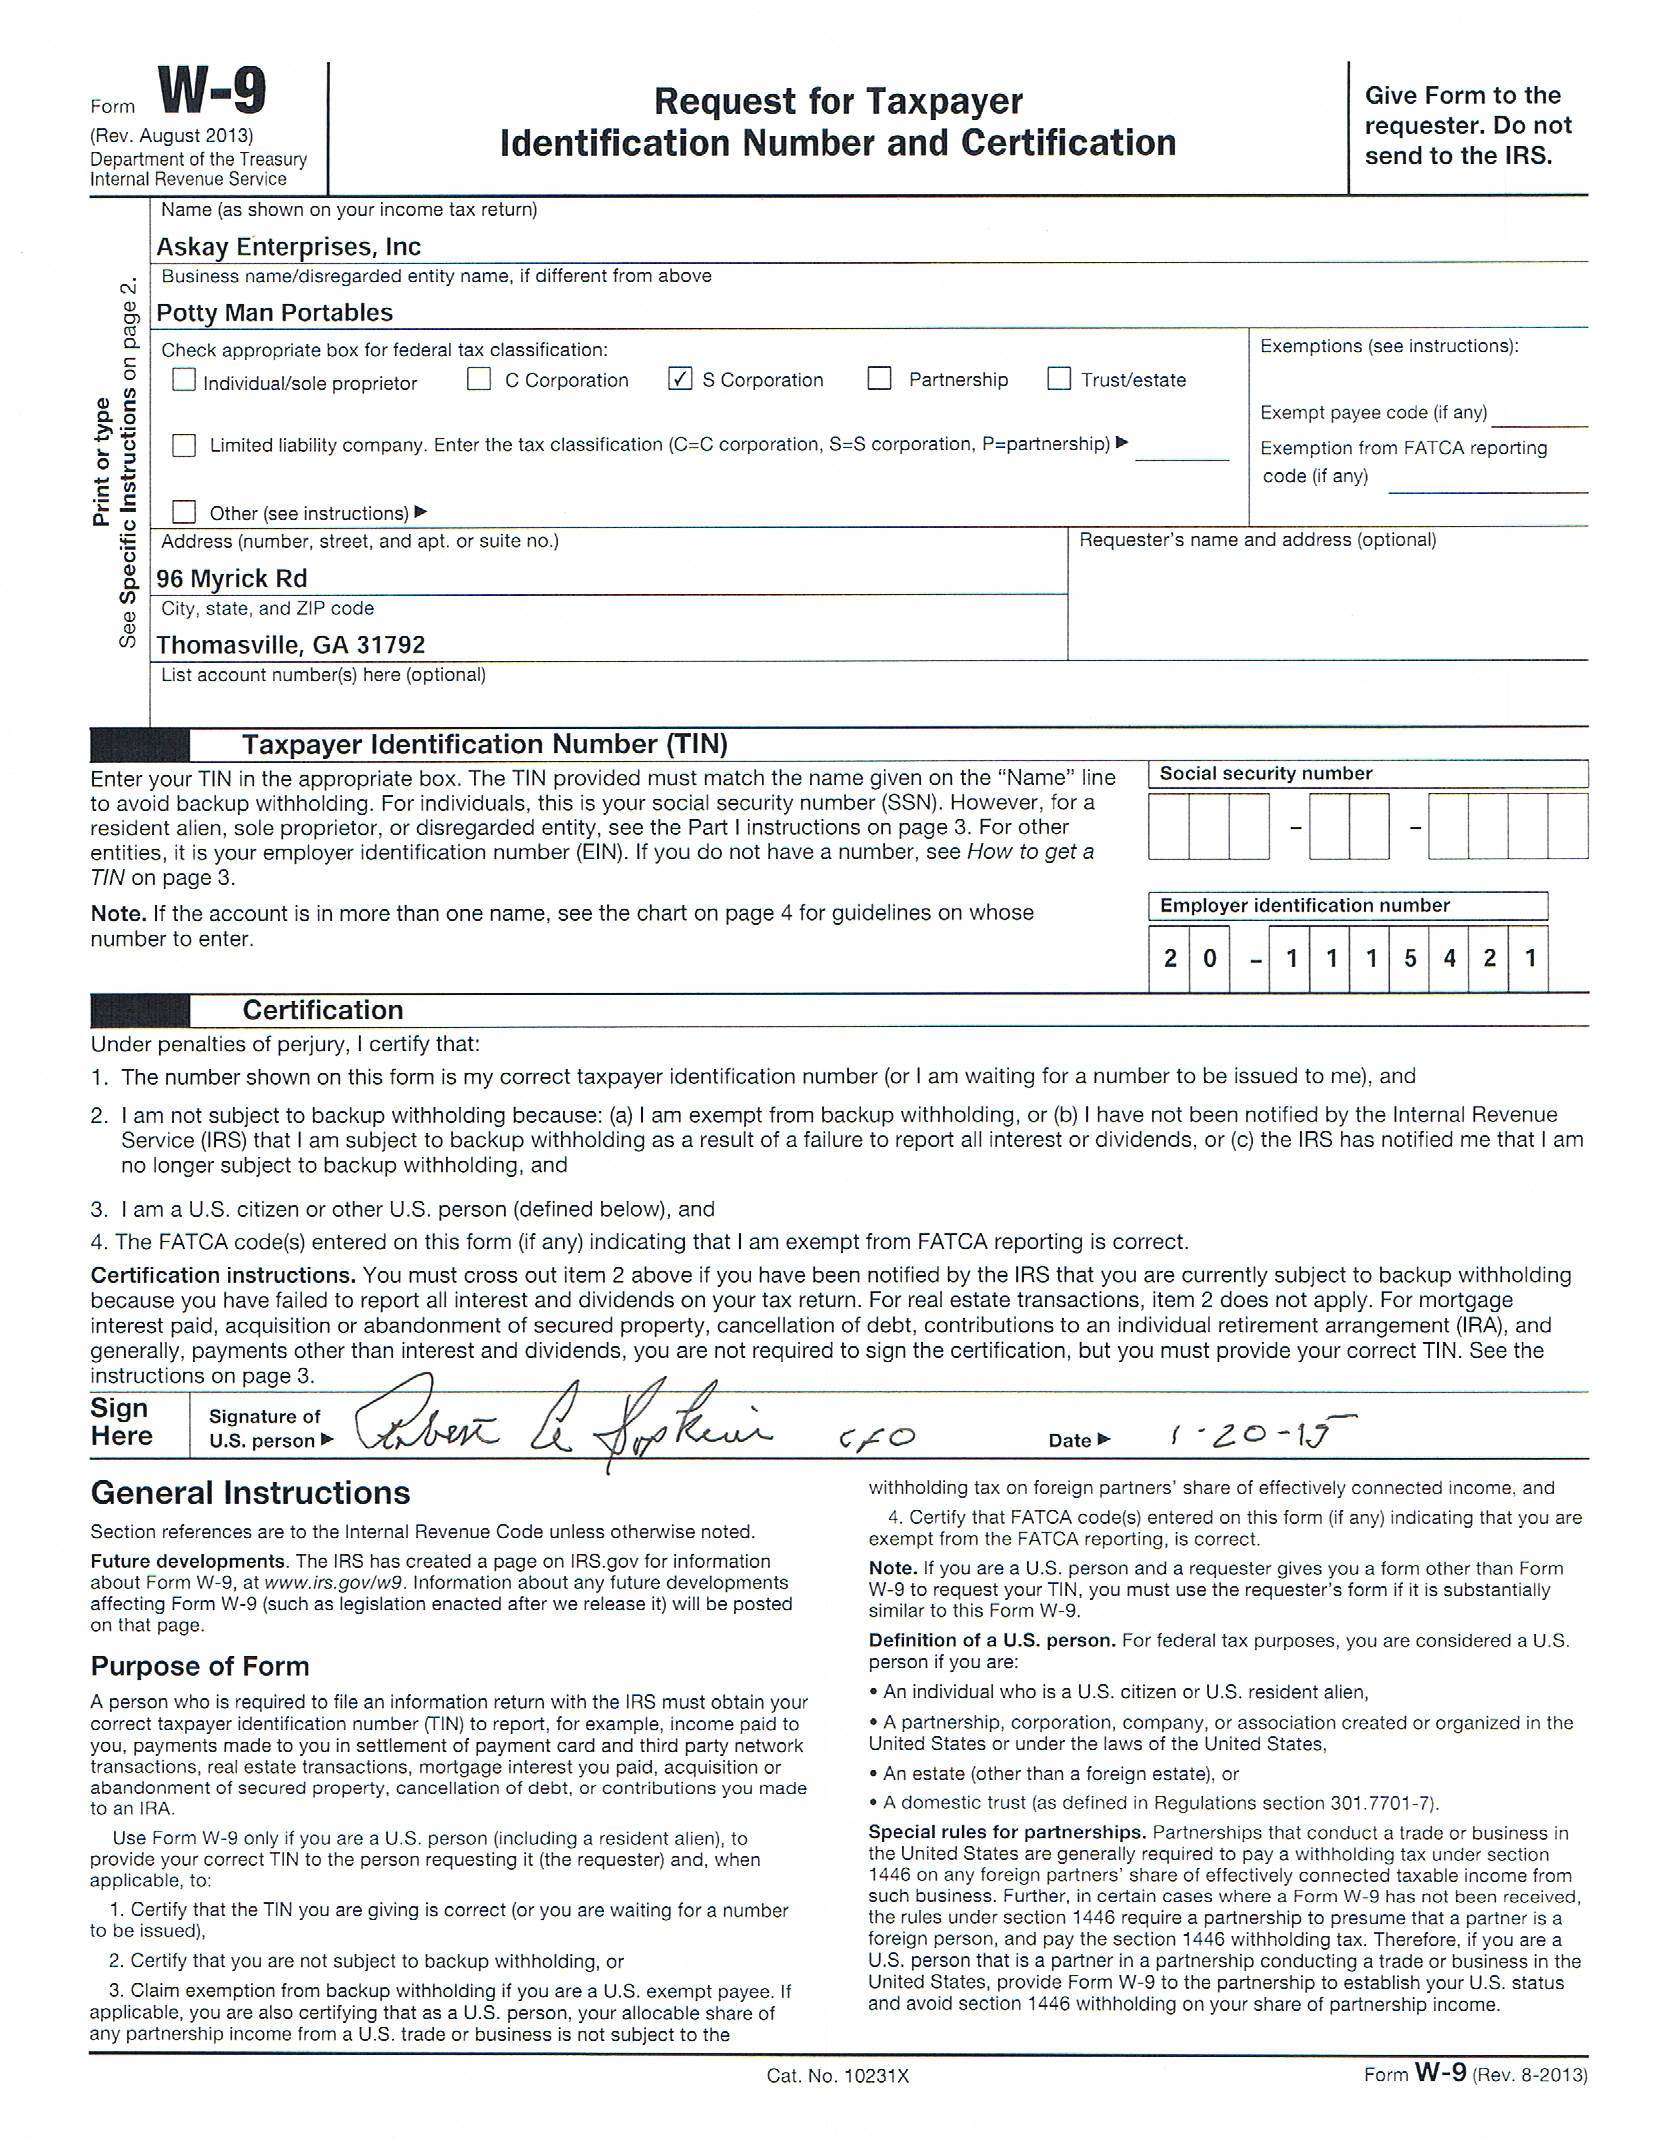 W 9 Tax Form Irs Blank For 2016 Design Templates 2014 Choice